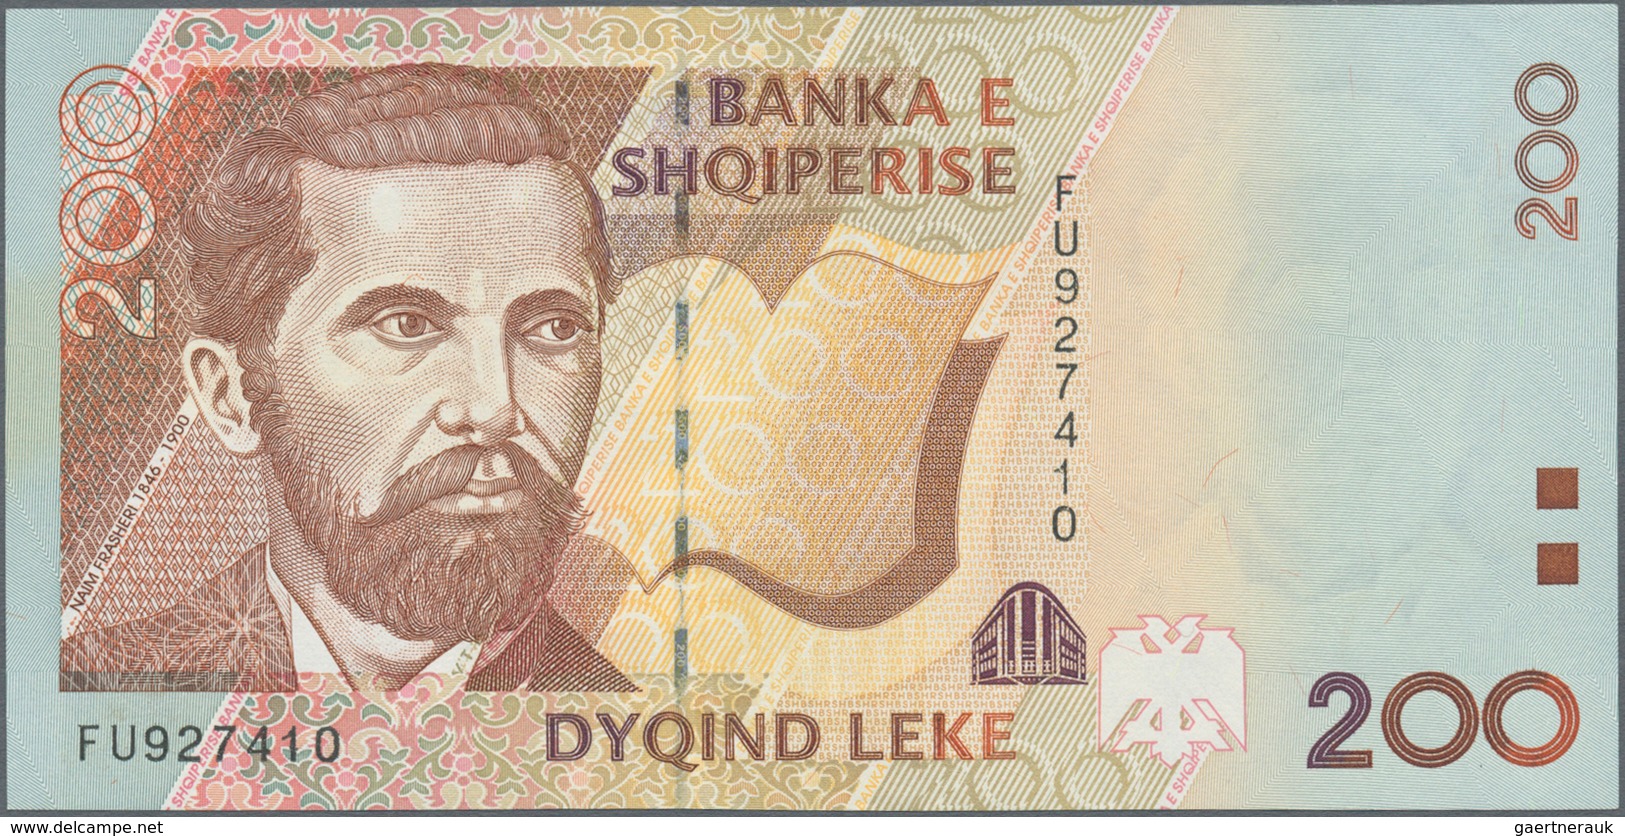 Albania / Albanien: Set with 5 banknotes 1996 issue with 100, 200, 500, 1000 and 5000 Leke, P.62-66,